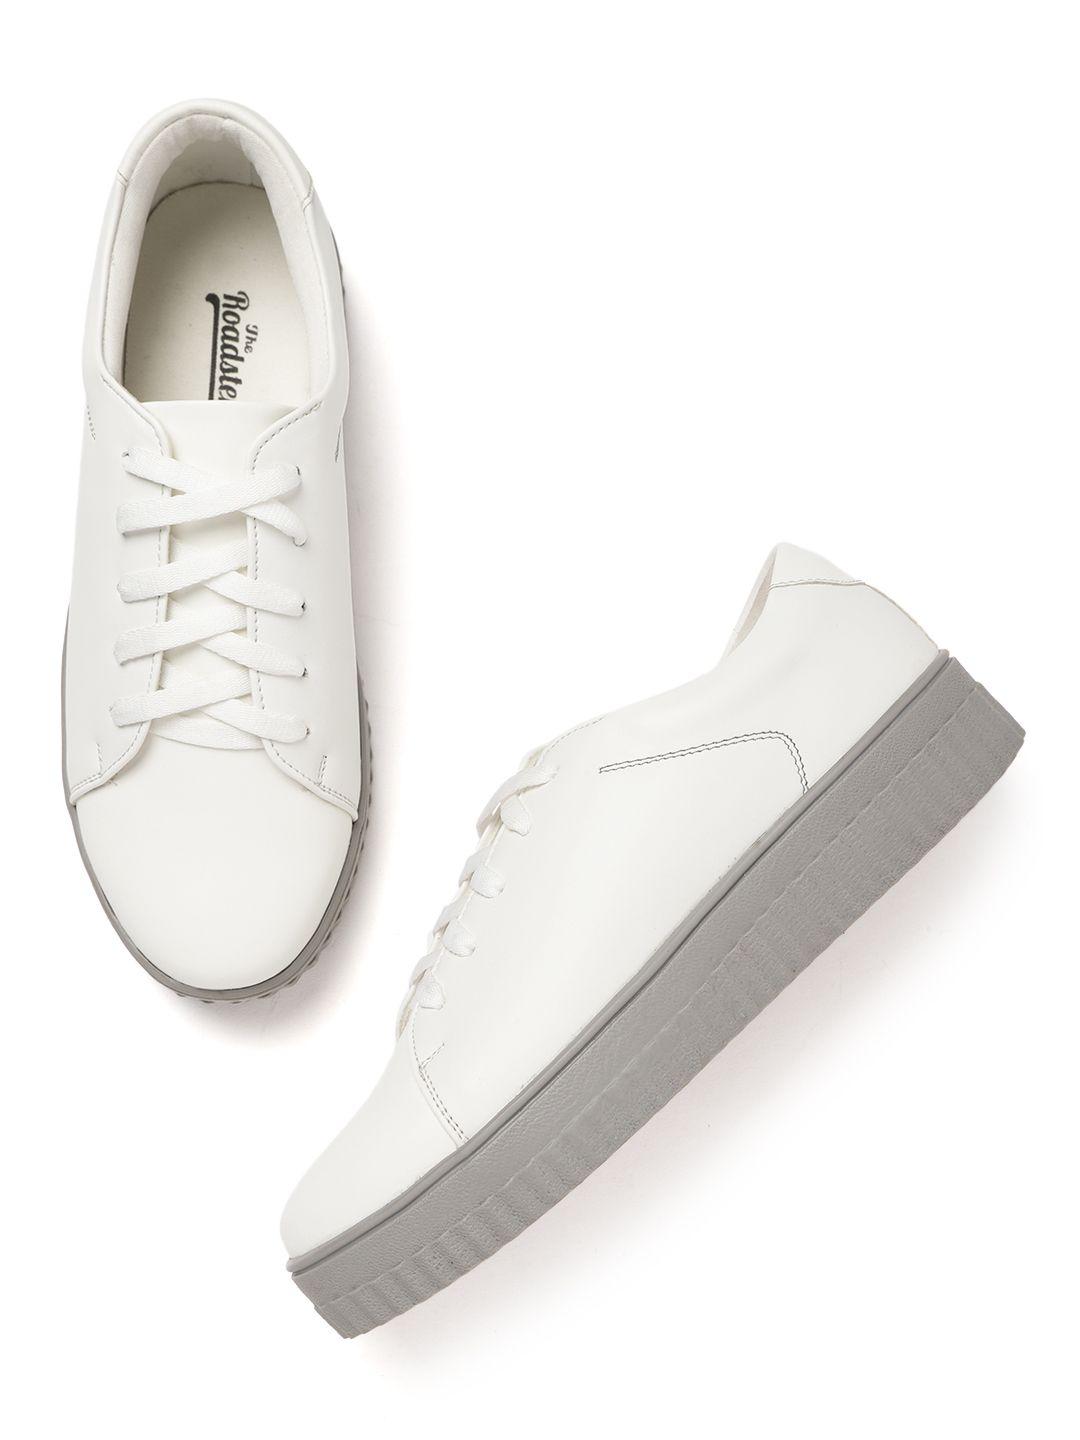 the roadster lifestyle co women white solid sneakers